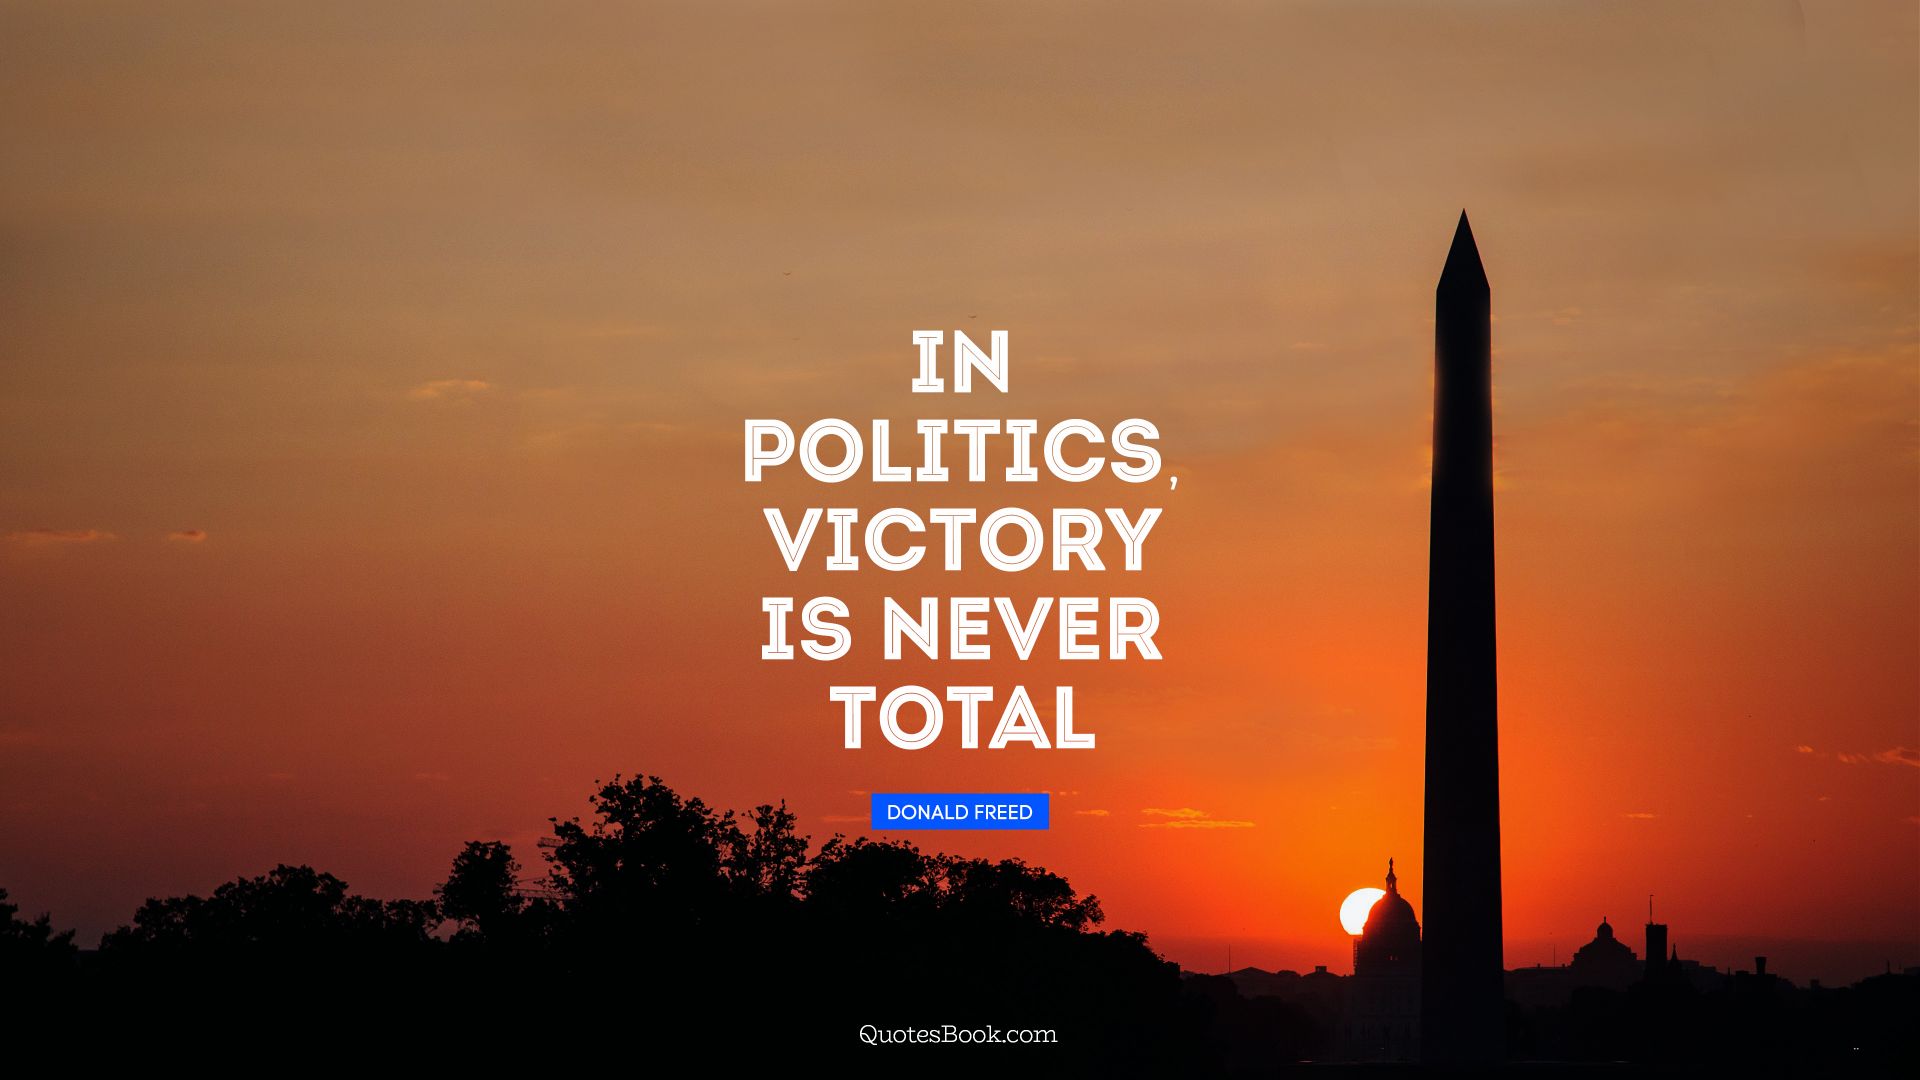 In politics, victory is never total. - Quote by Donald Freed